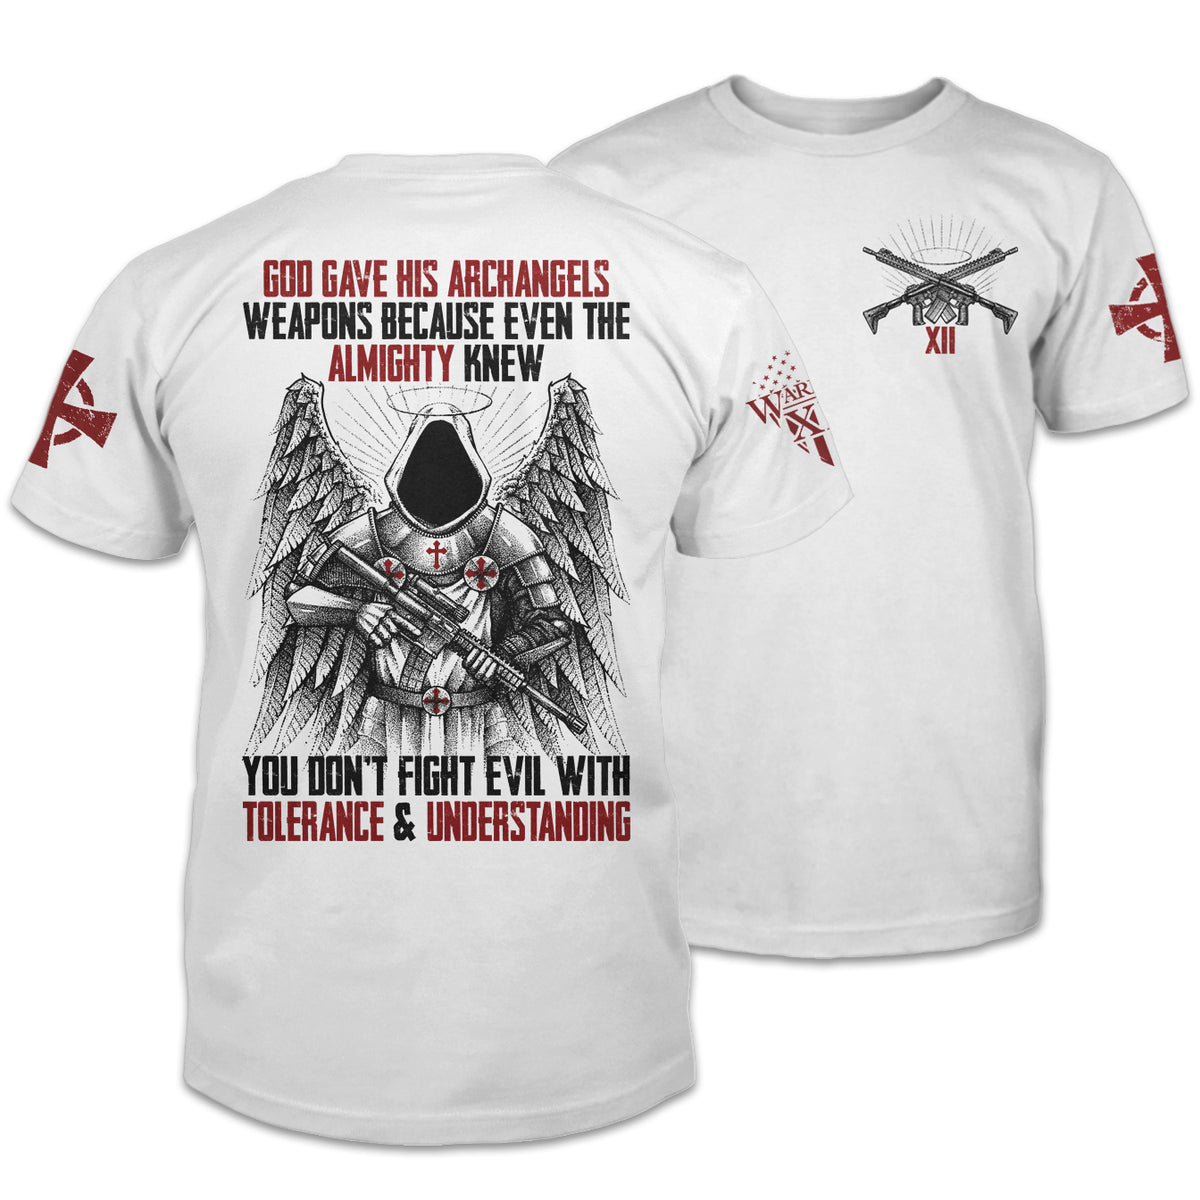 Front & back white t-shirt with the words "God gave his archangels weapons, because even the Almighty knew you don't fight evil with tolerance and understanding" with an Archangel holding a gun printed on the shirt.